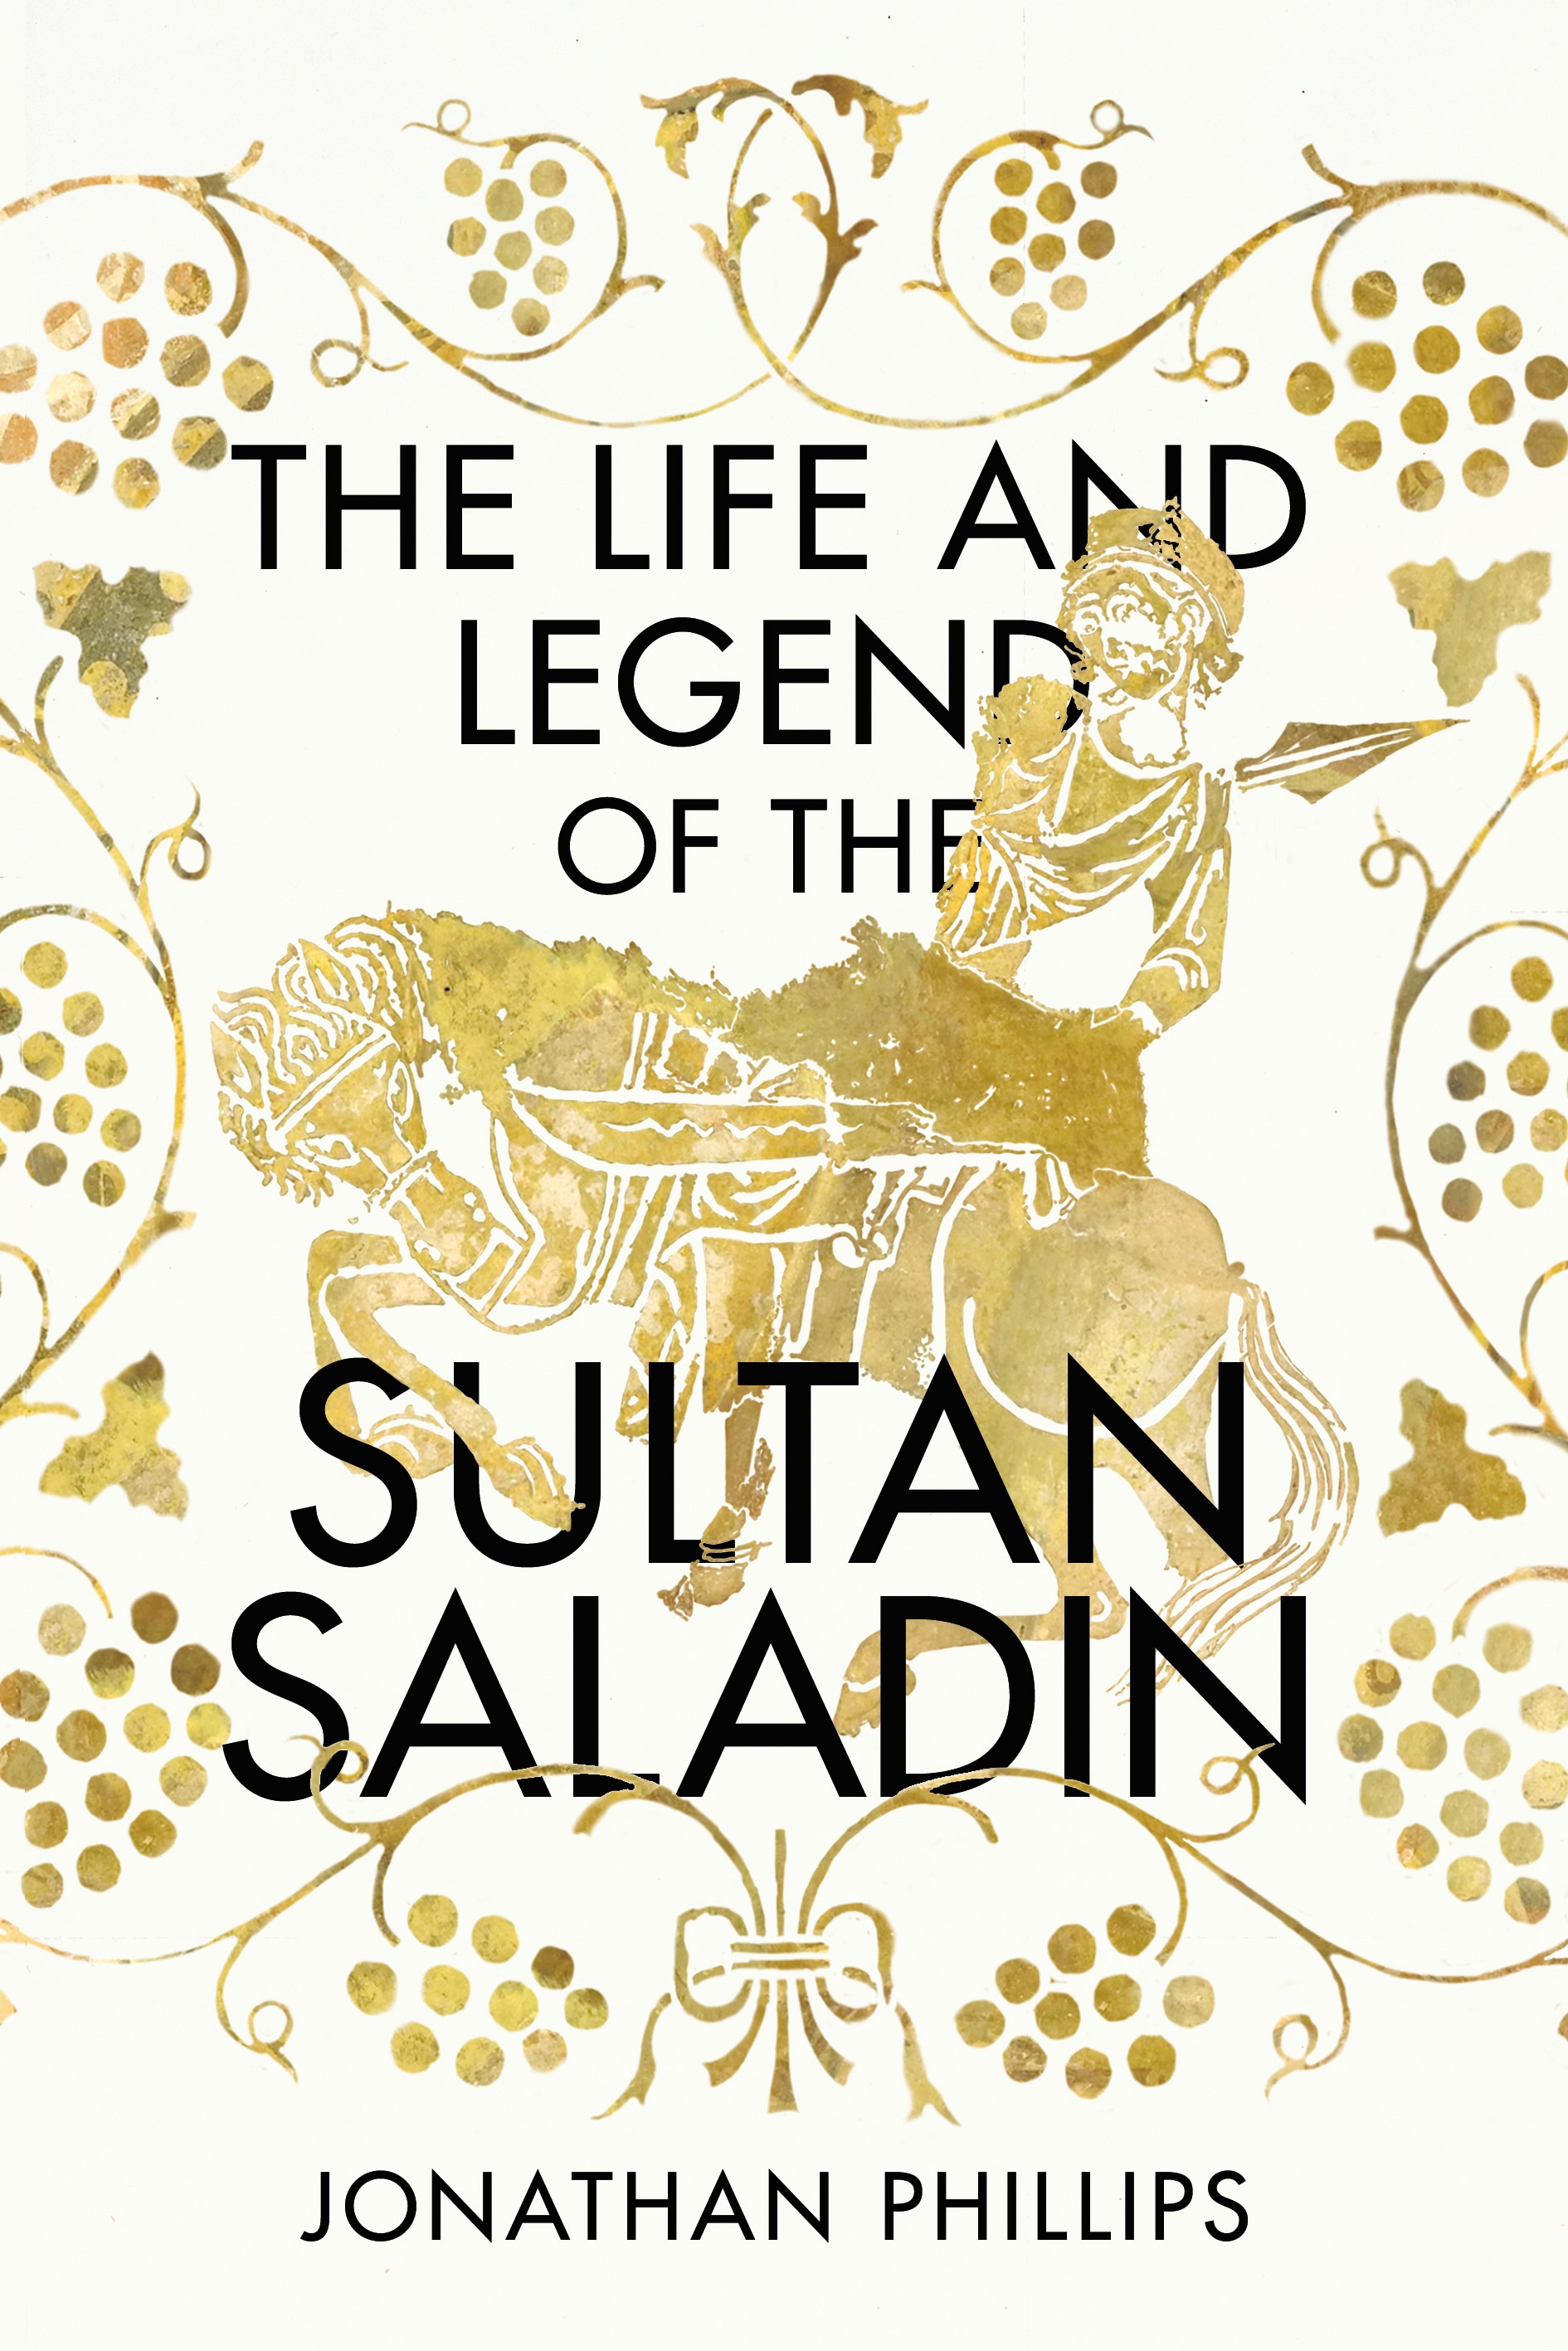 Book “The Life and Legend of the Sultan Saladin” by Jonathan Phillips — April 25, 2019